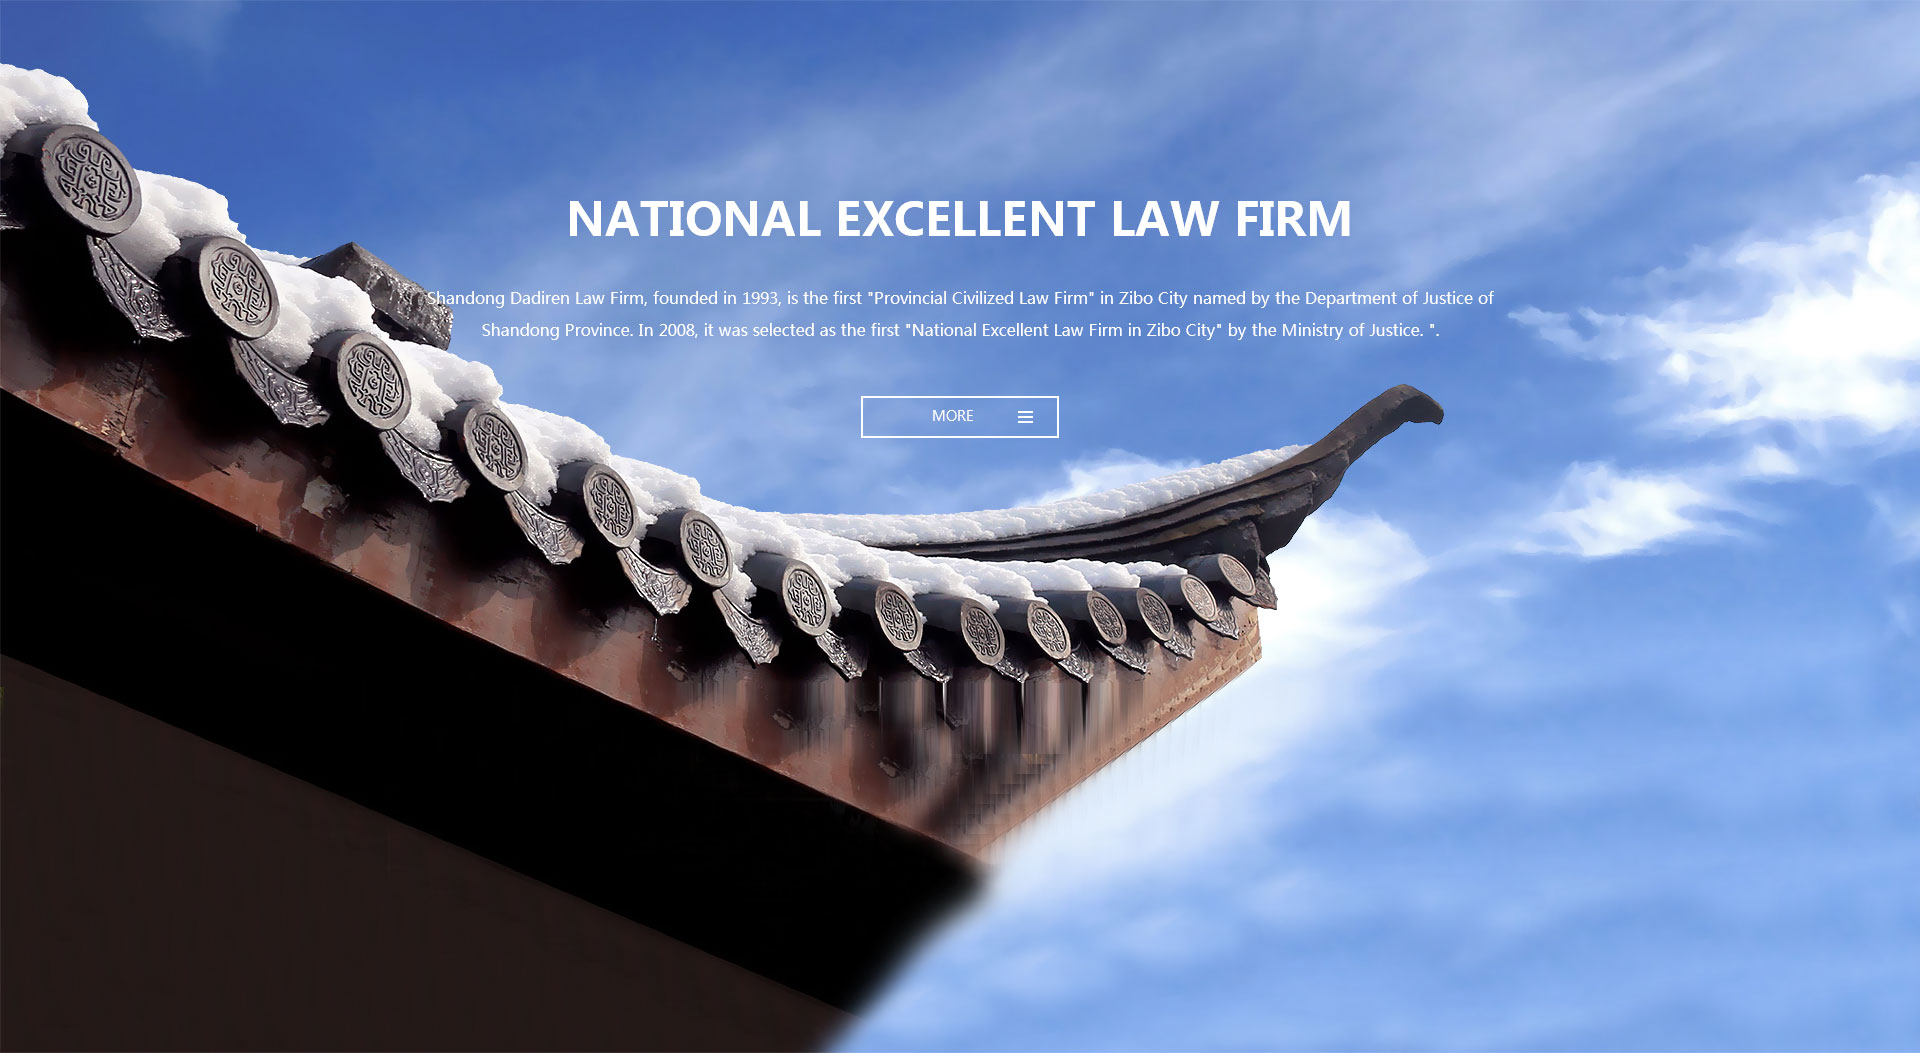 National Excellent Law Firm